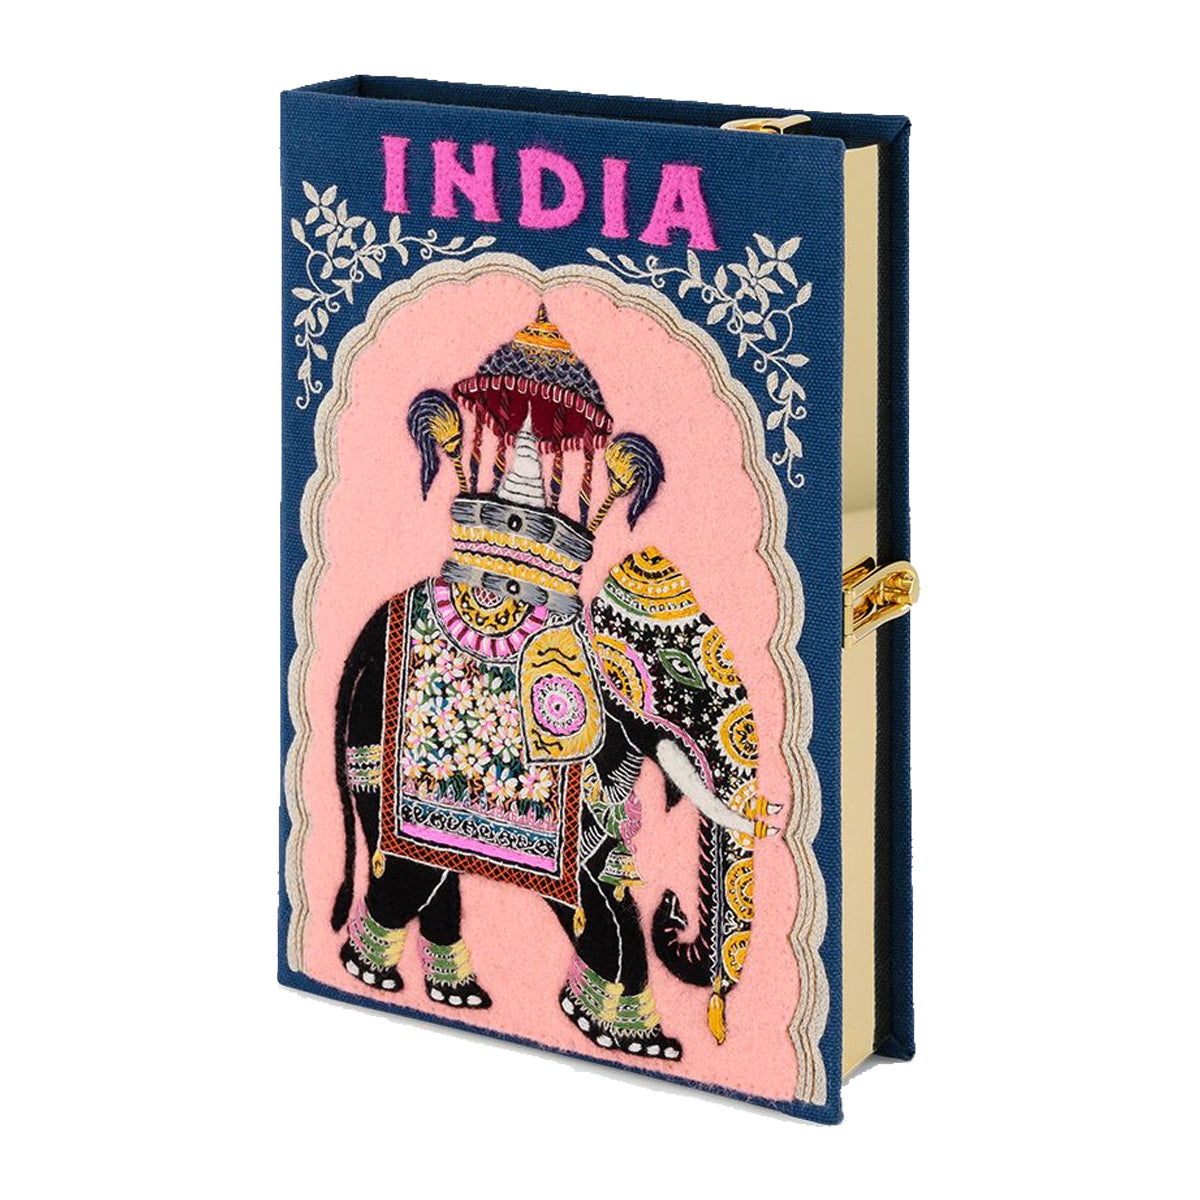 India Book Clutch with Strap